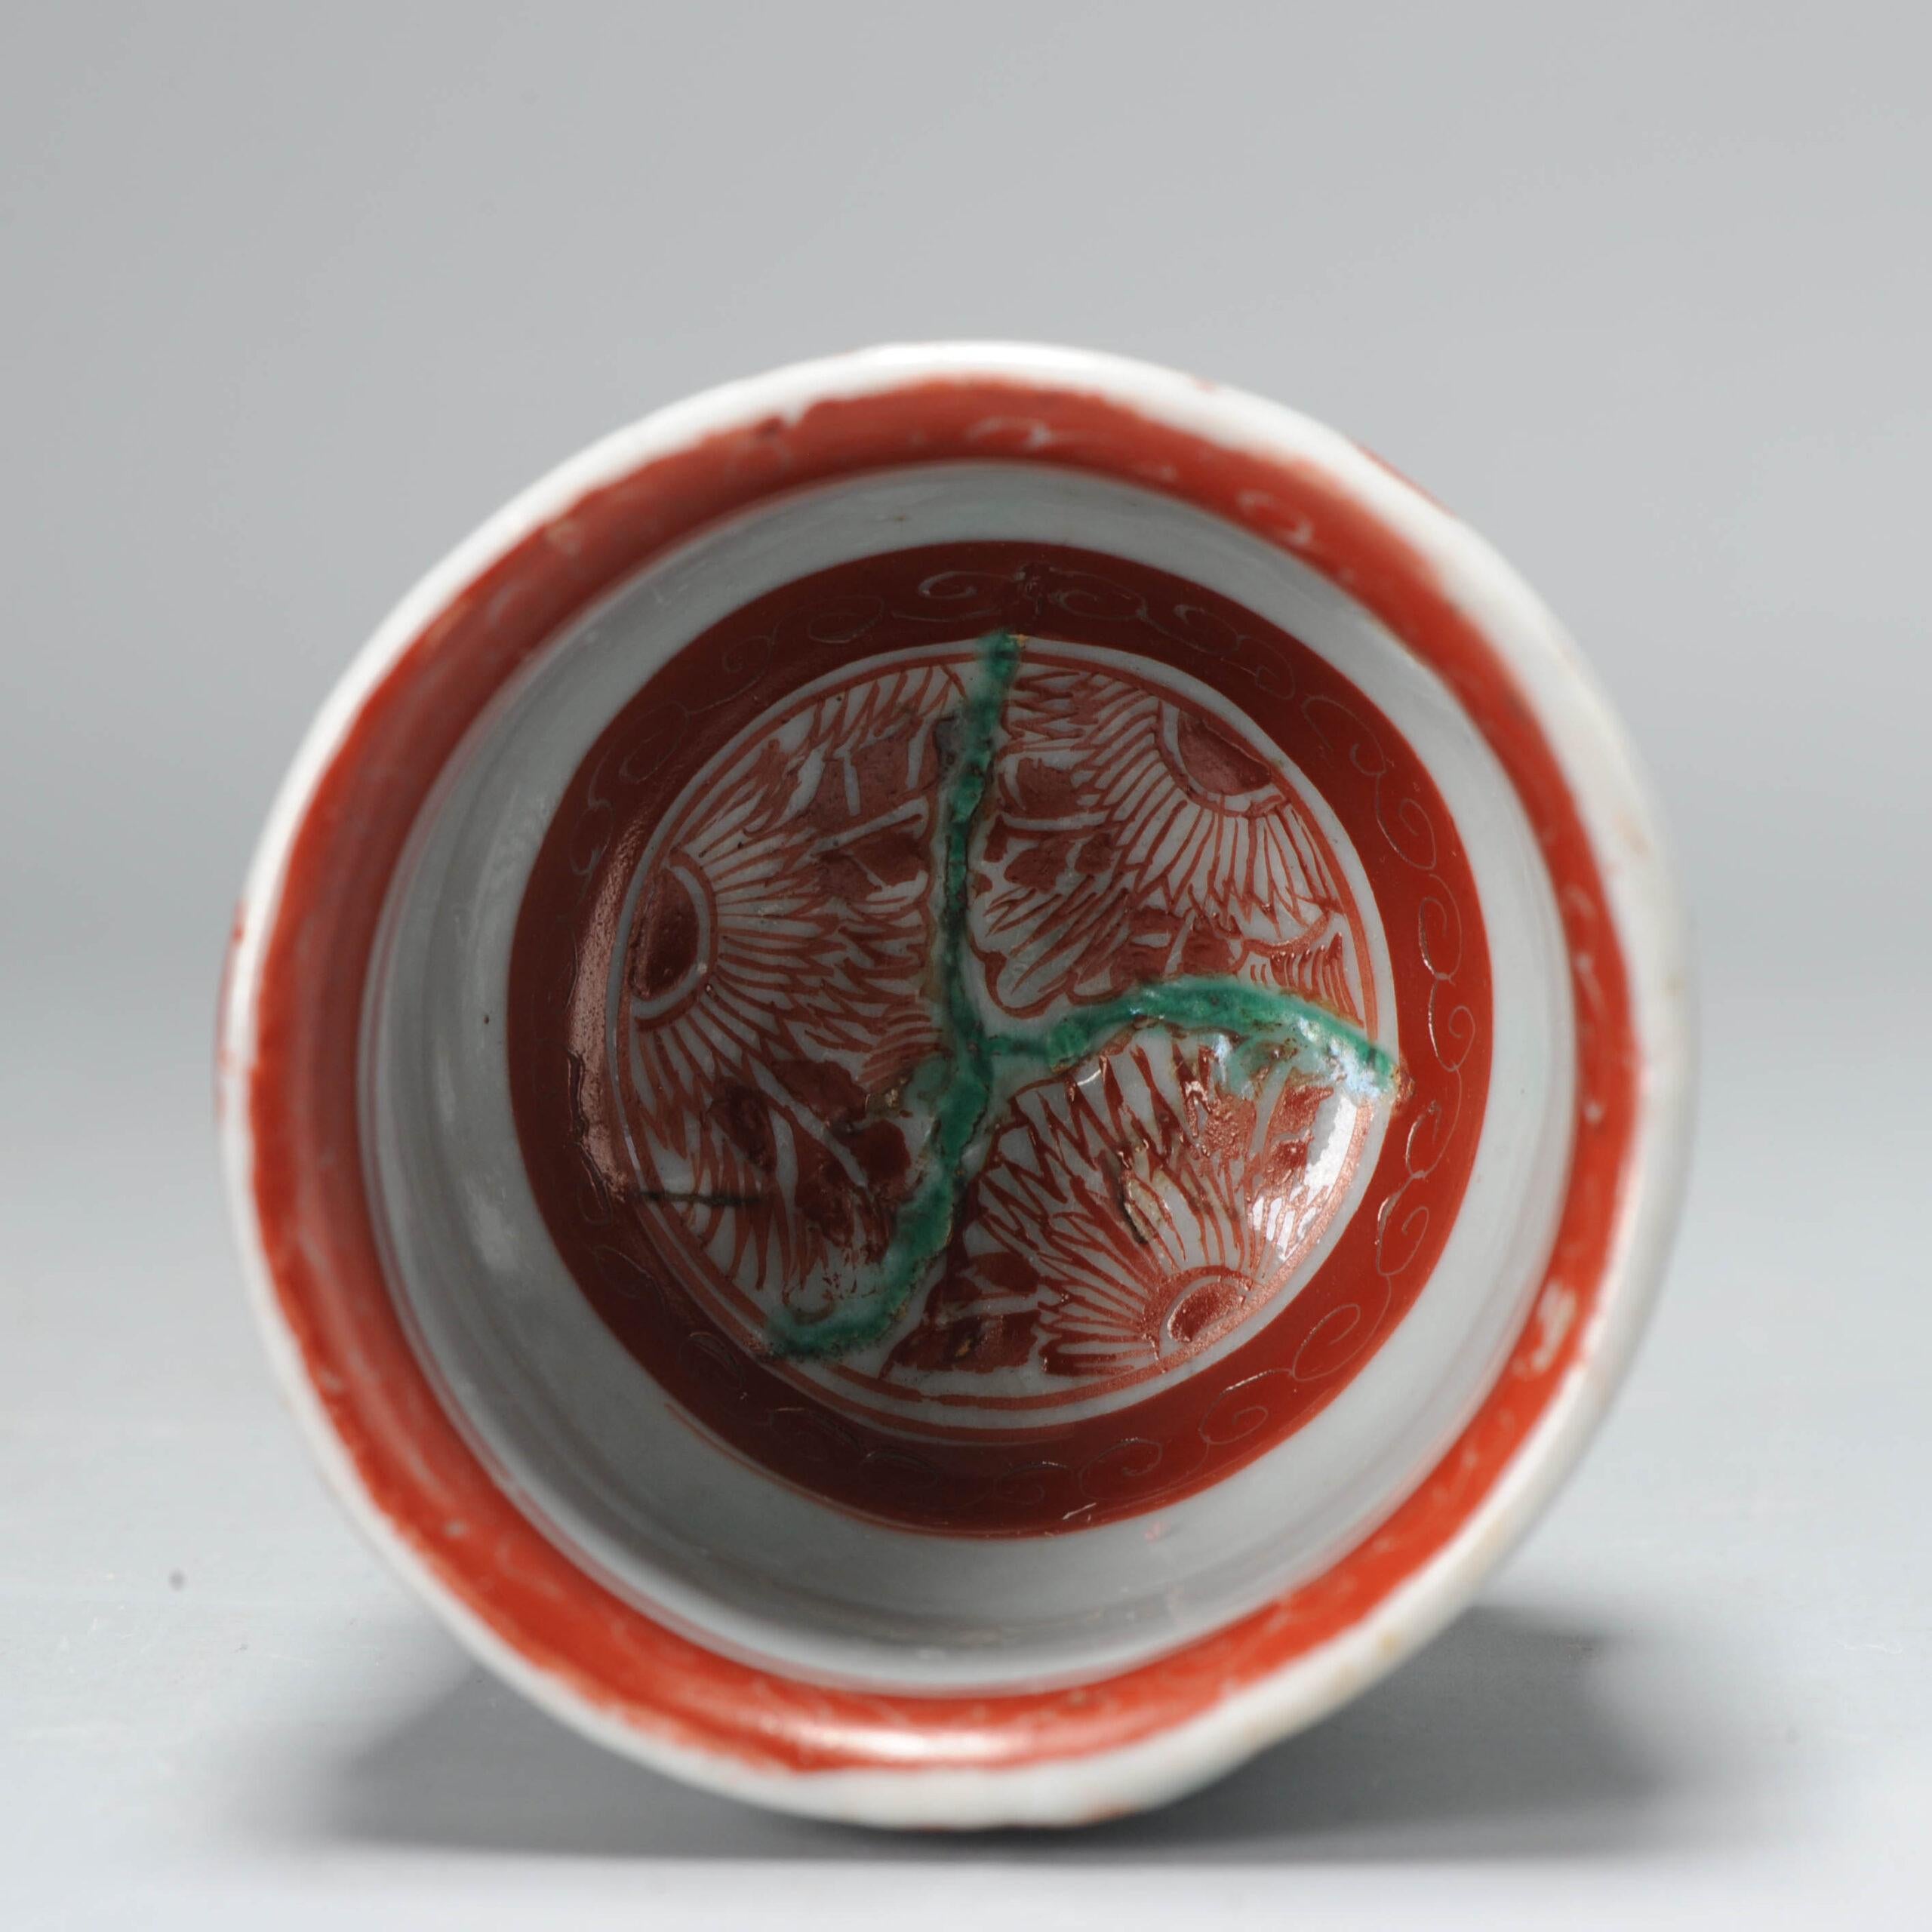 This nice tea bowl/cup (might also be incense burner) from the early 17th century. With a Wucai/Verte scene of a wise man in a garden. The base with an overglaze red Chenghua mark. The fun part is that the red circled green parts on the body are